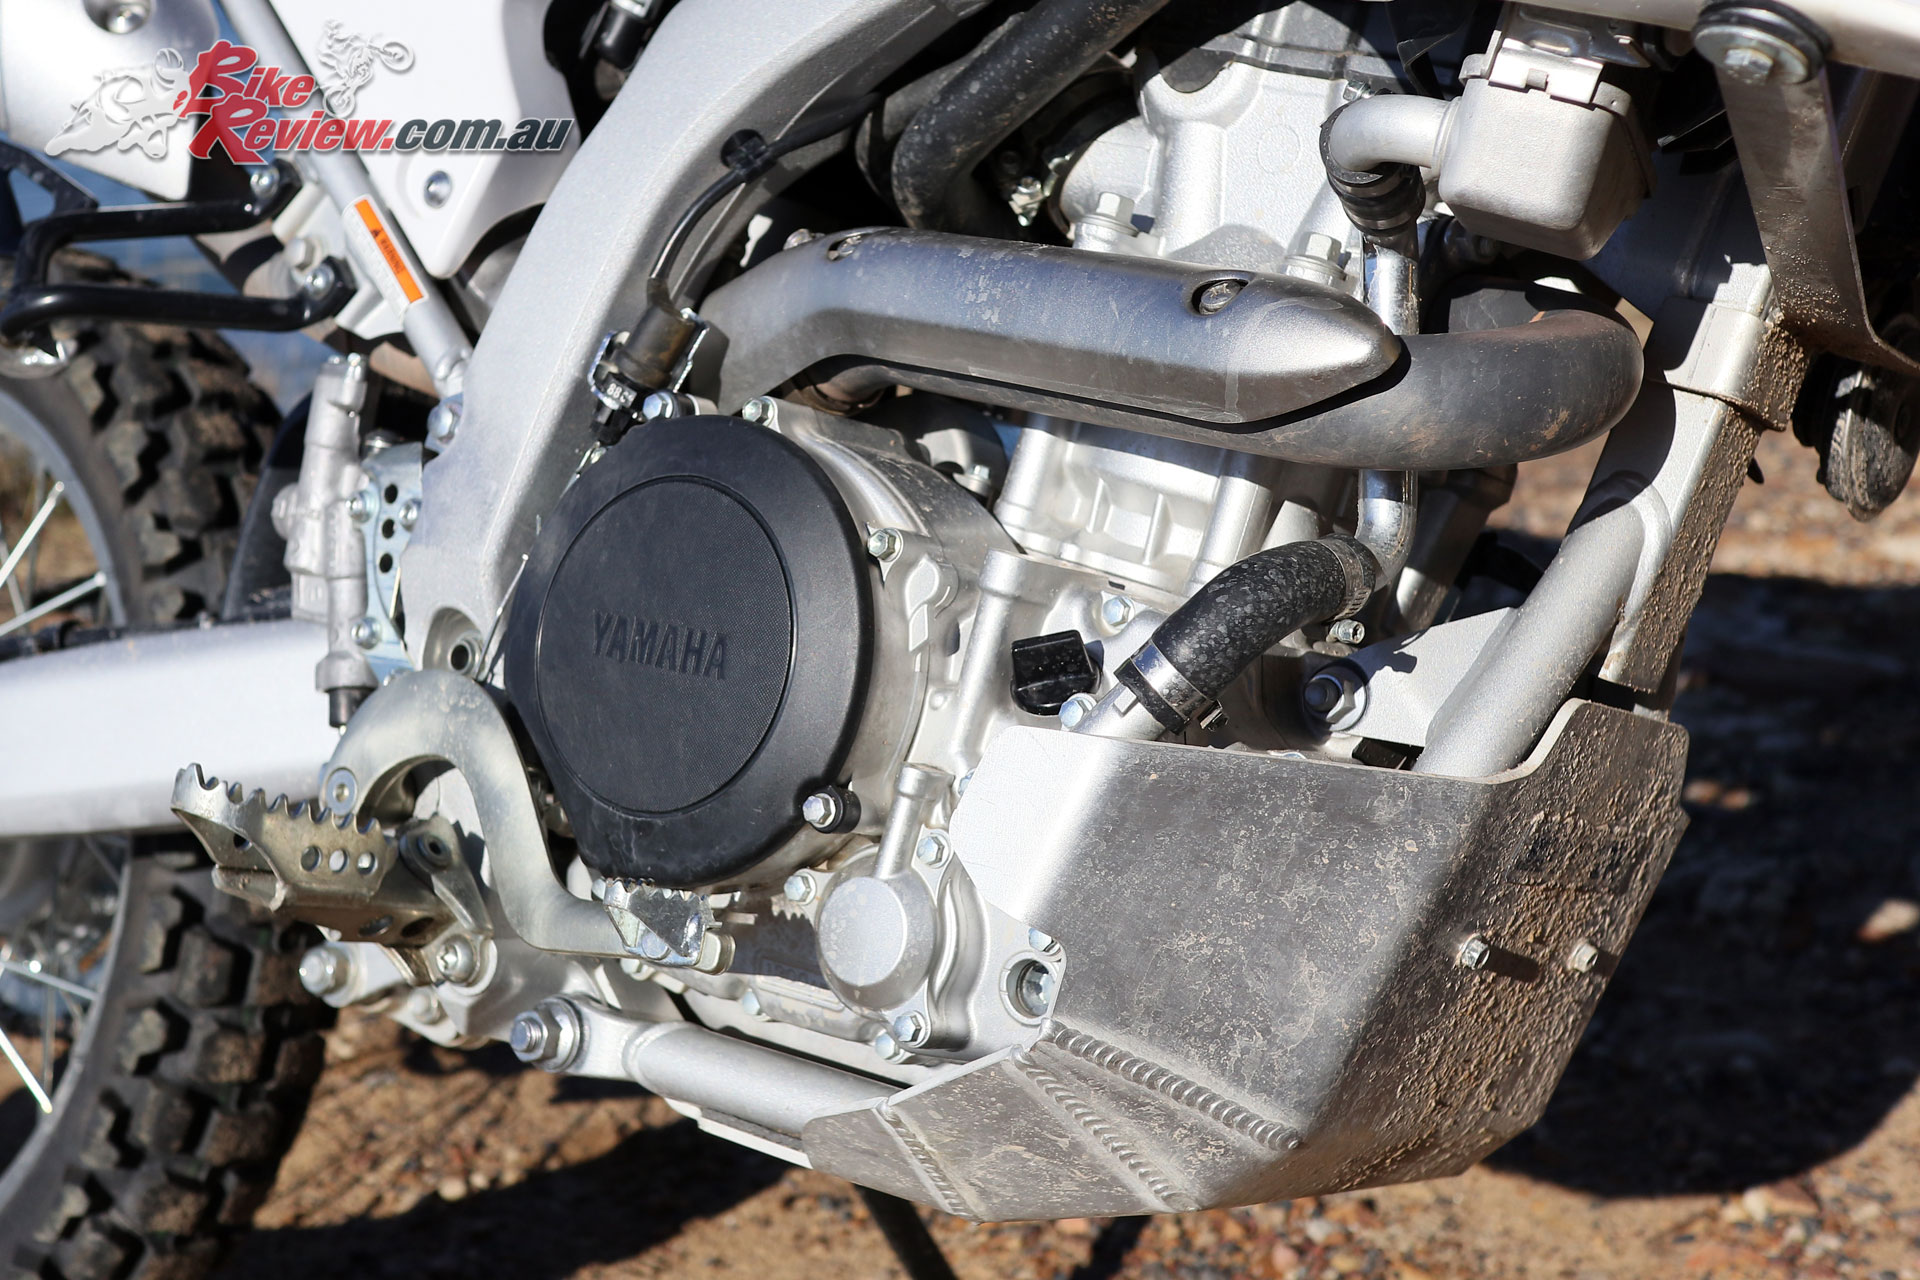 The WR250R features an easily maintained 250cc single-cylinder powerplant